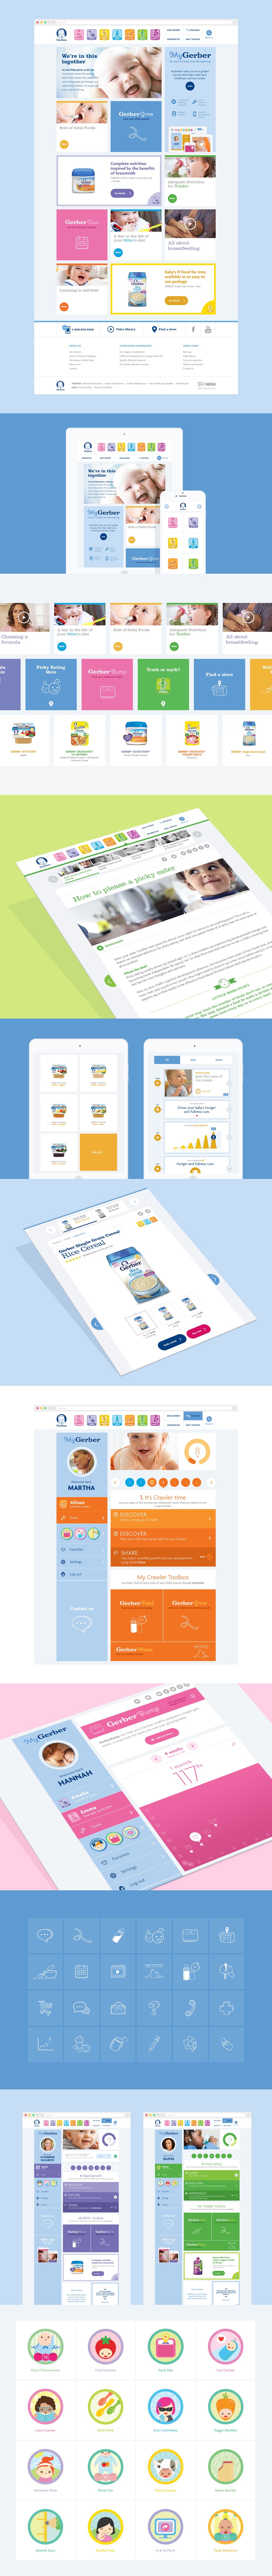 gerber site baby identity Experience nutrition colorful icons Badges modules tiles ux Responsive dashboard tools